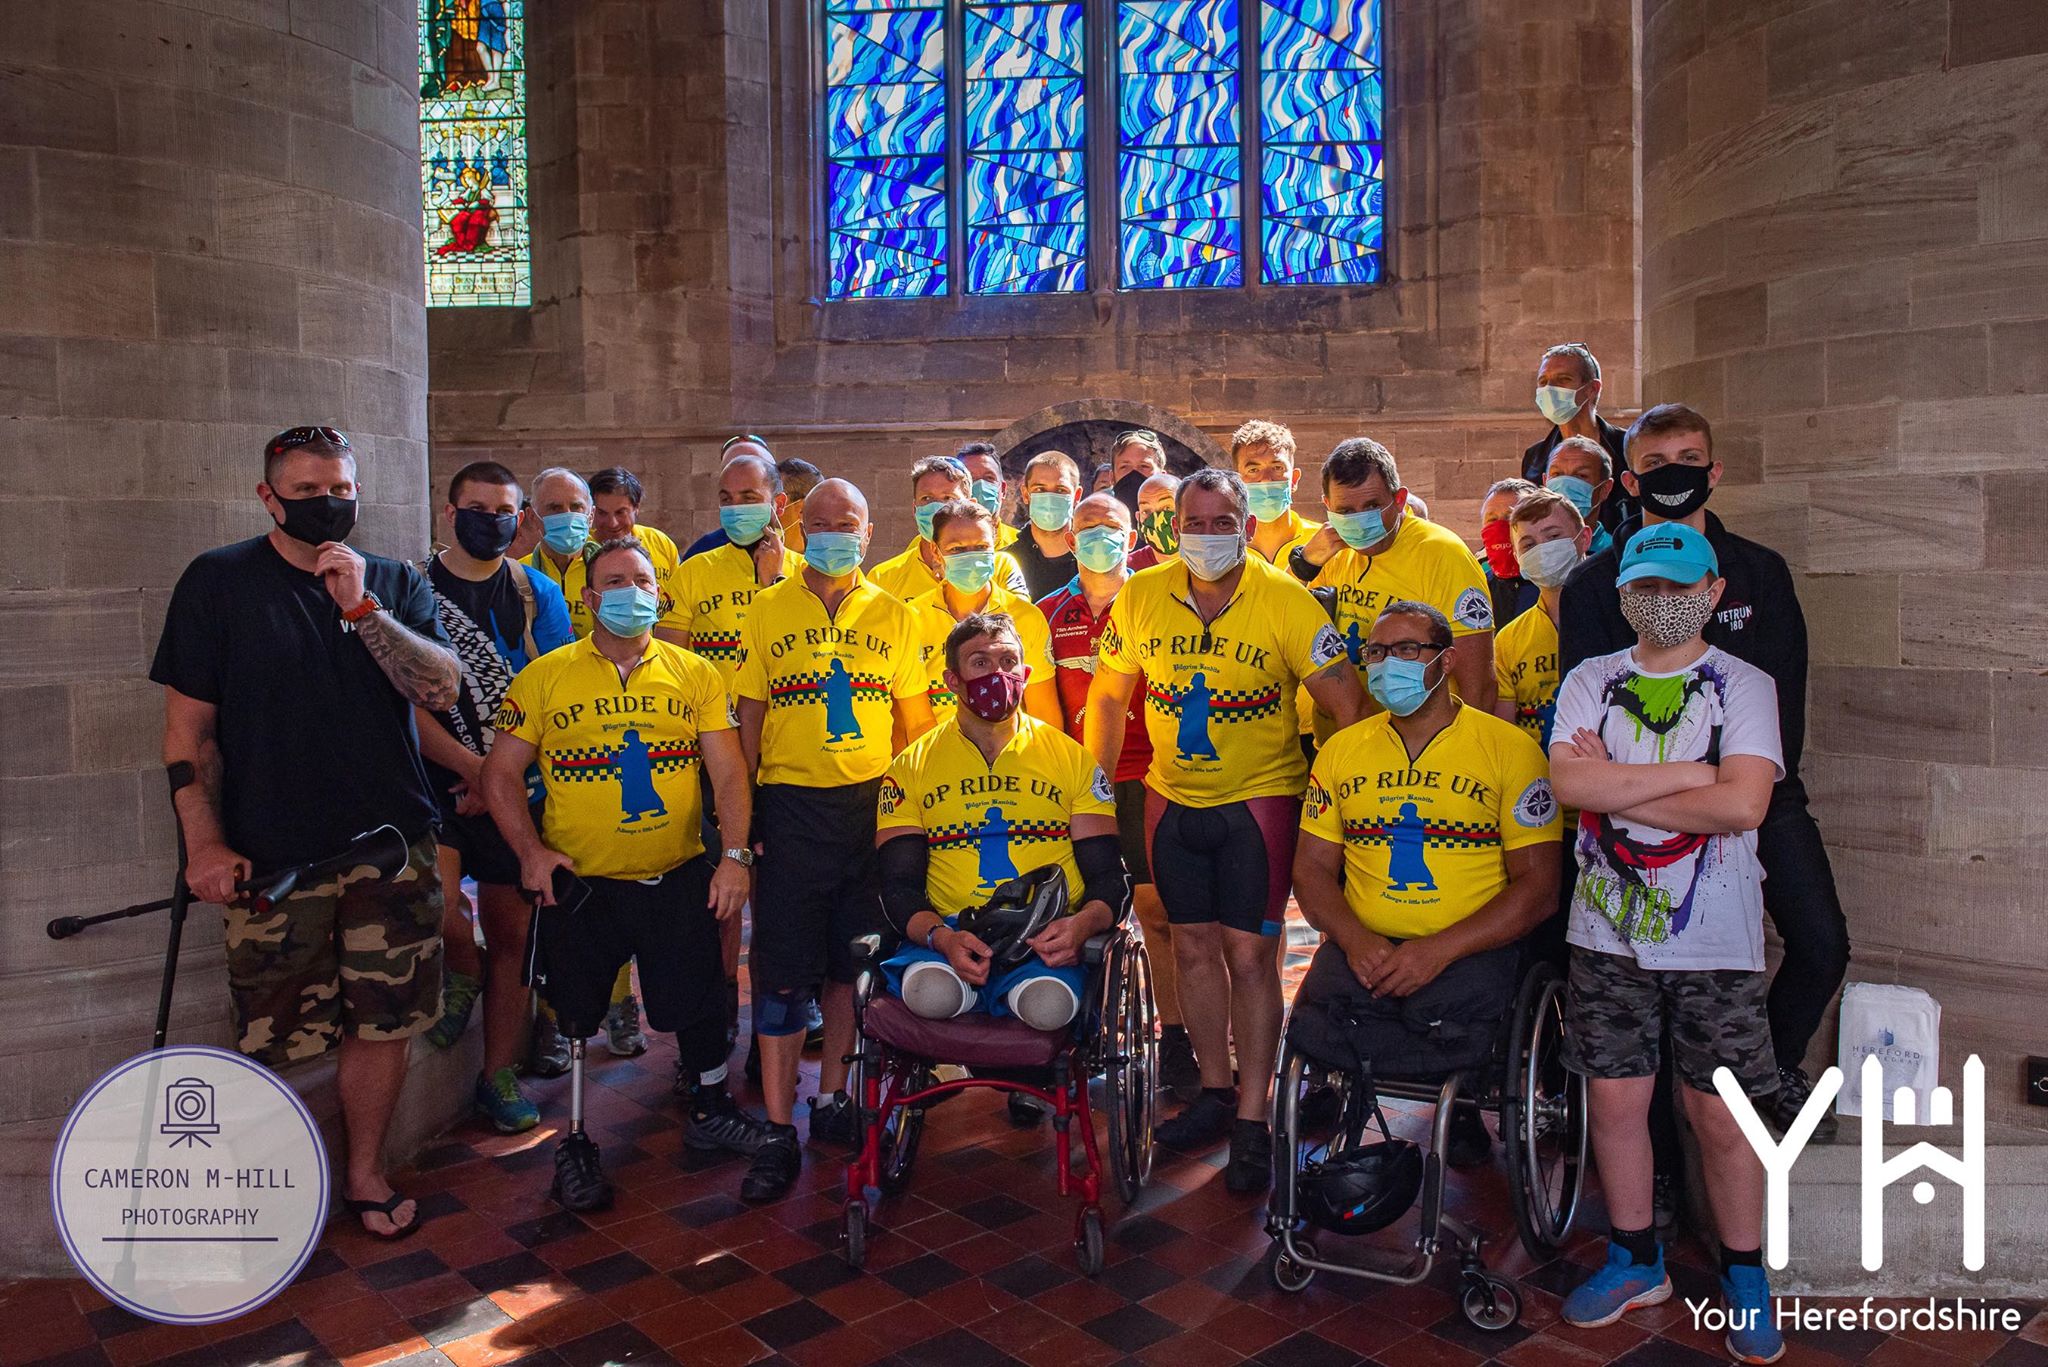 NEWS | Pilgrim Bandits travel through Hereford as part of John O’Groats to Lands End cycle ride